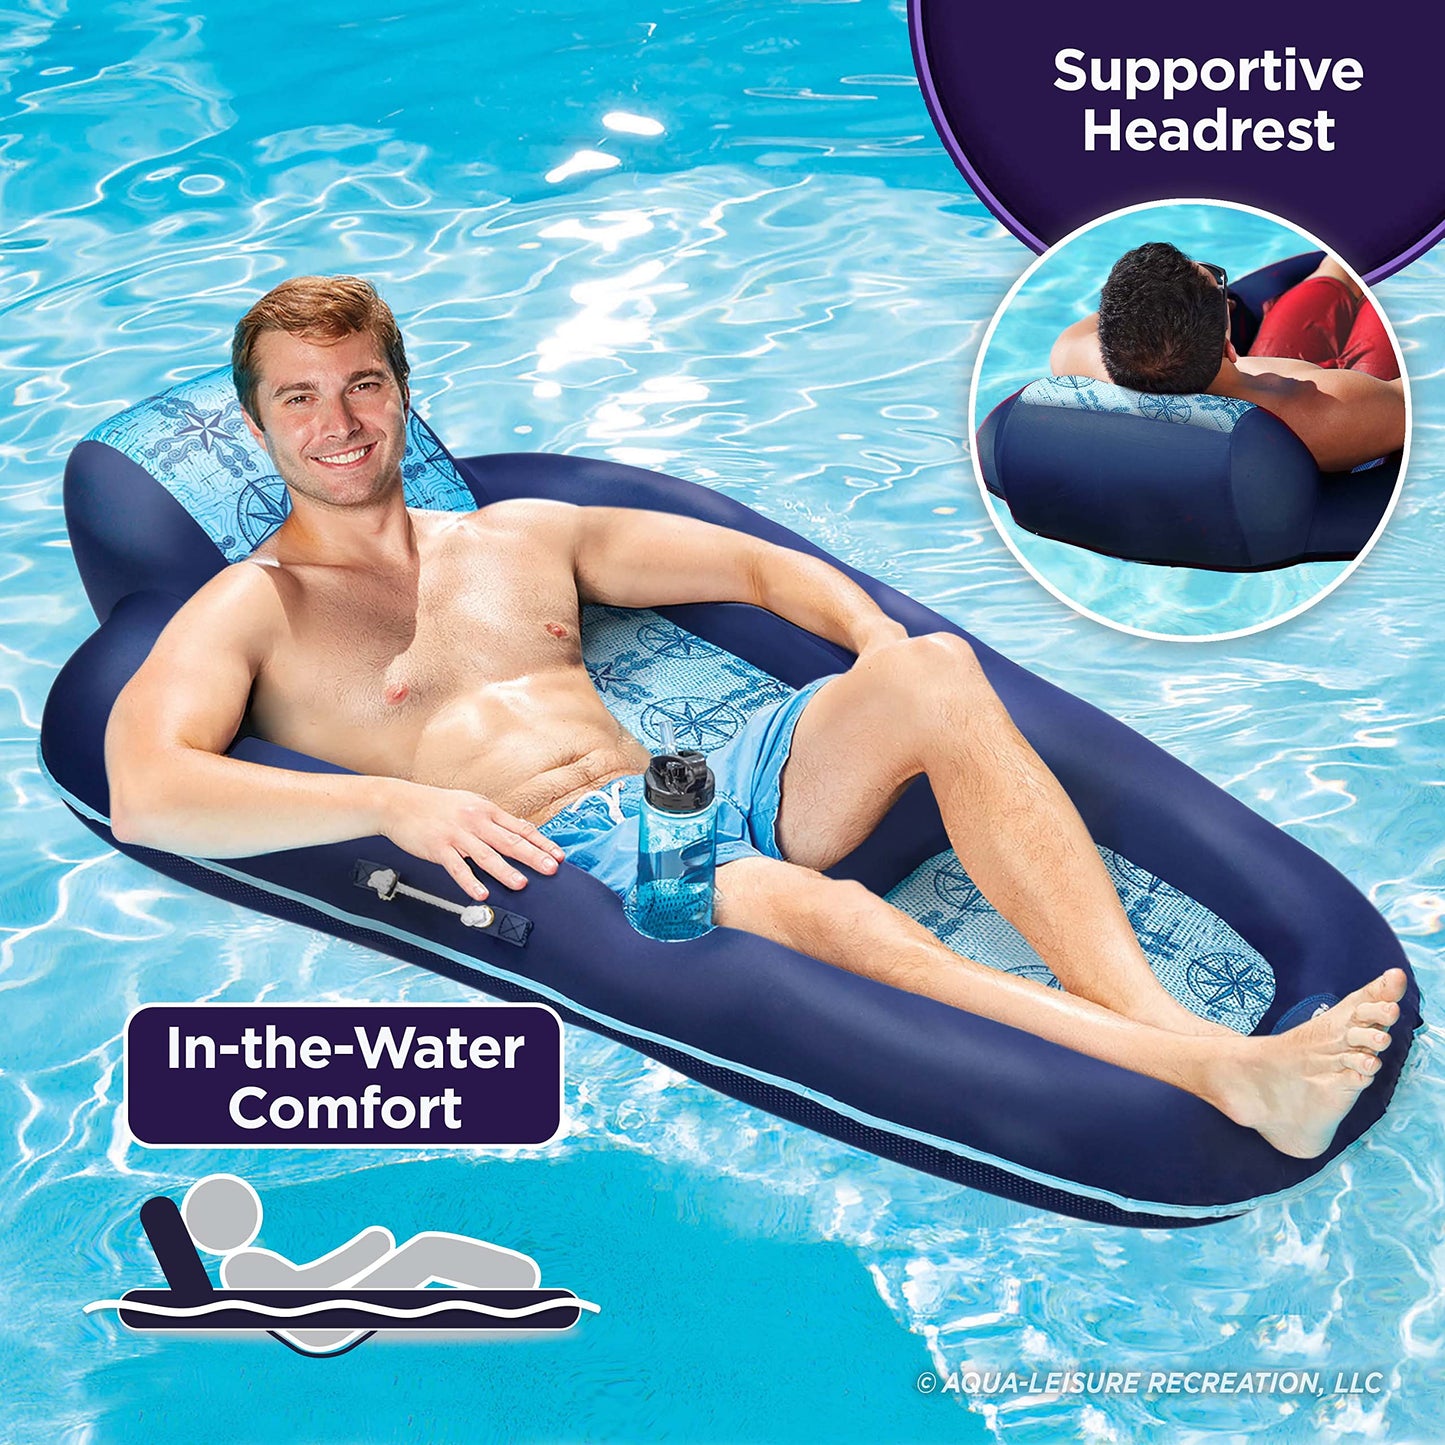 Aqua Ultimate Pool Float Lounges, Recliners, Tanners – Multiple Colors/Styles – for Adults and Kids Floating XL Lounge Navy/Light Blue